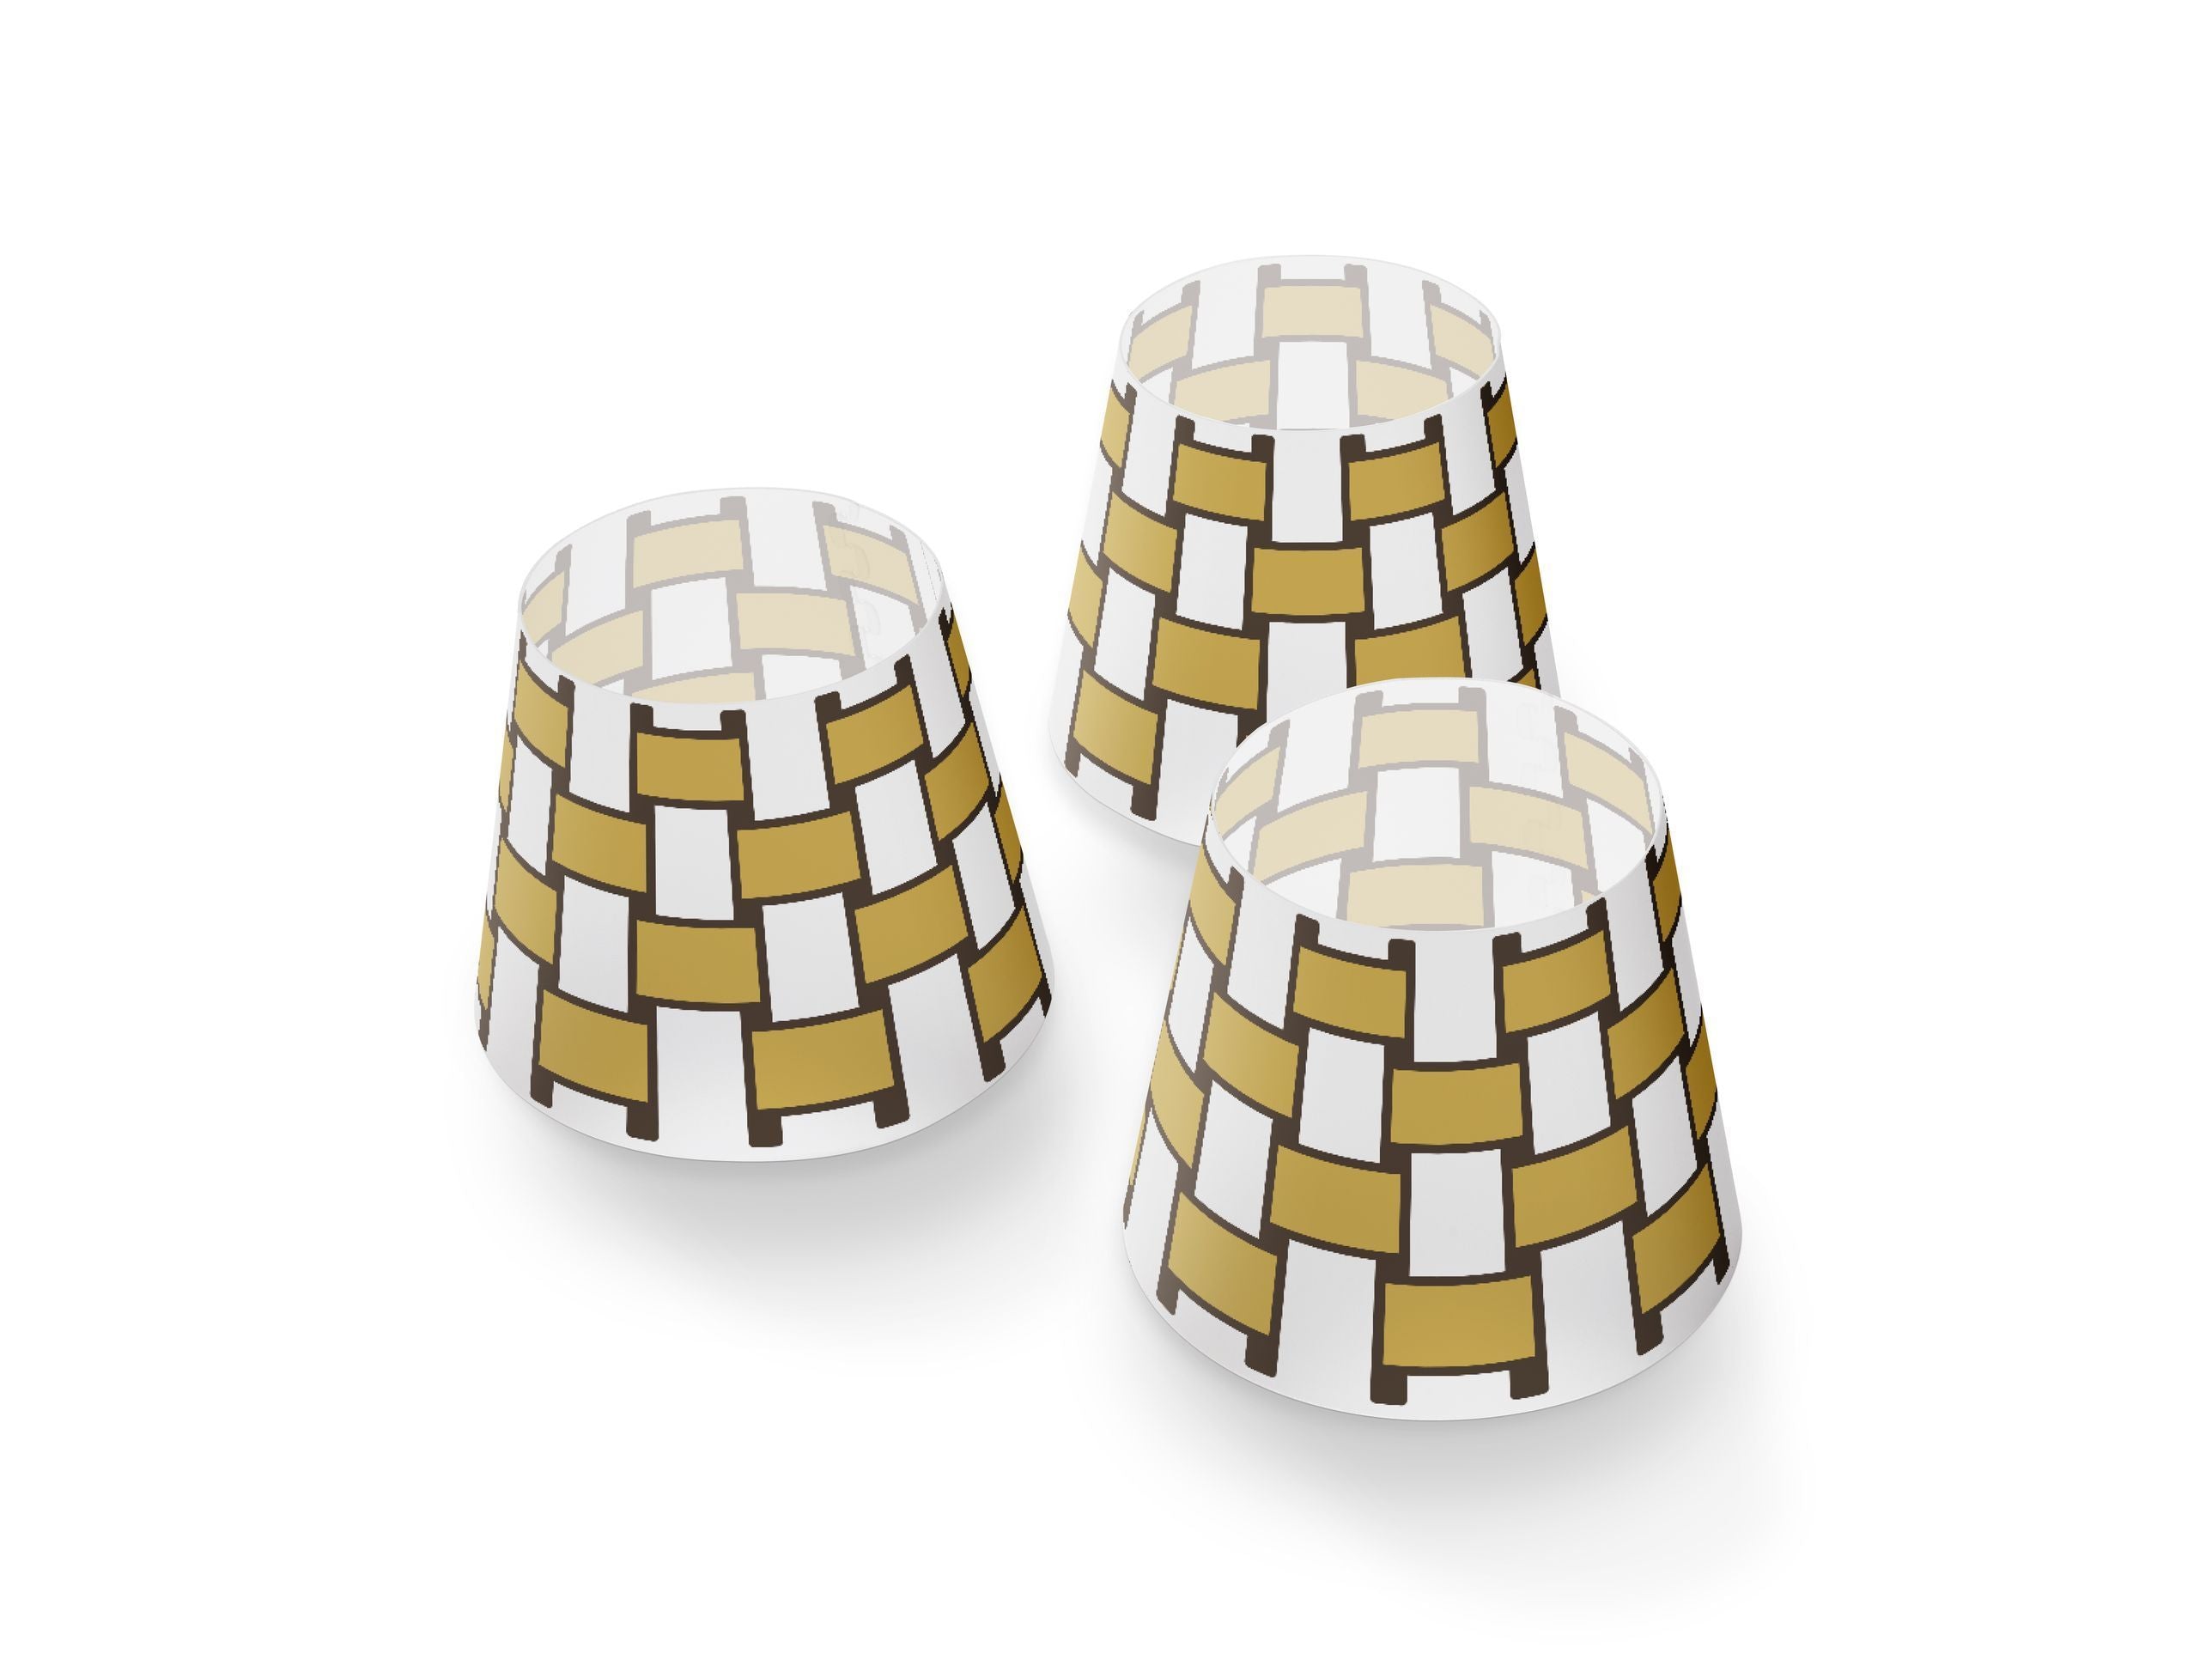 Fatboy Edison The Mini Cappie Lampshades Set Of 3 Basket Weave, Gold Honey